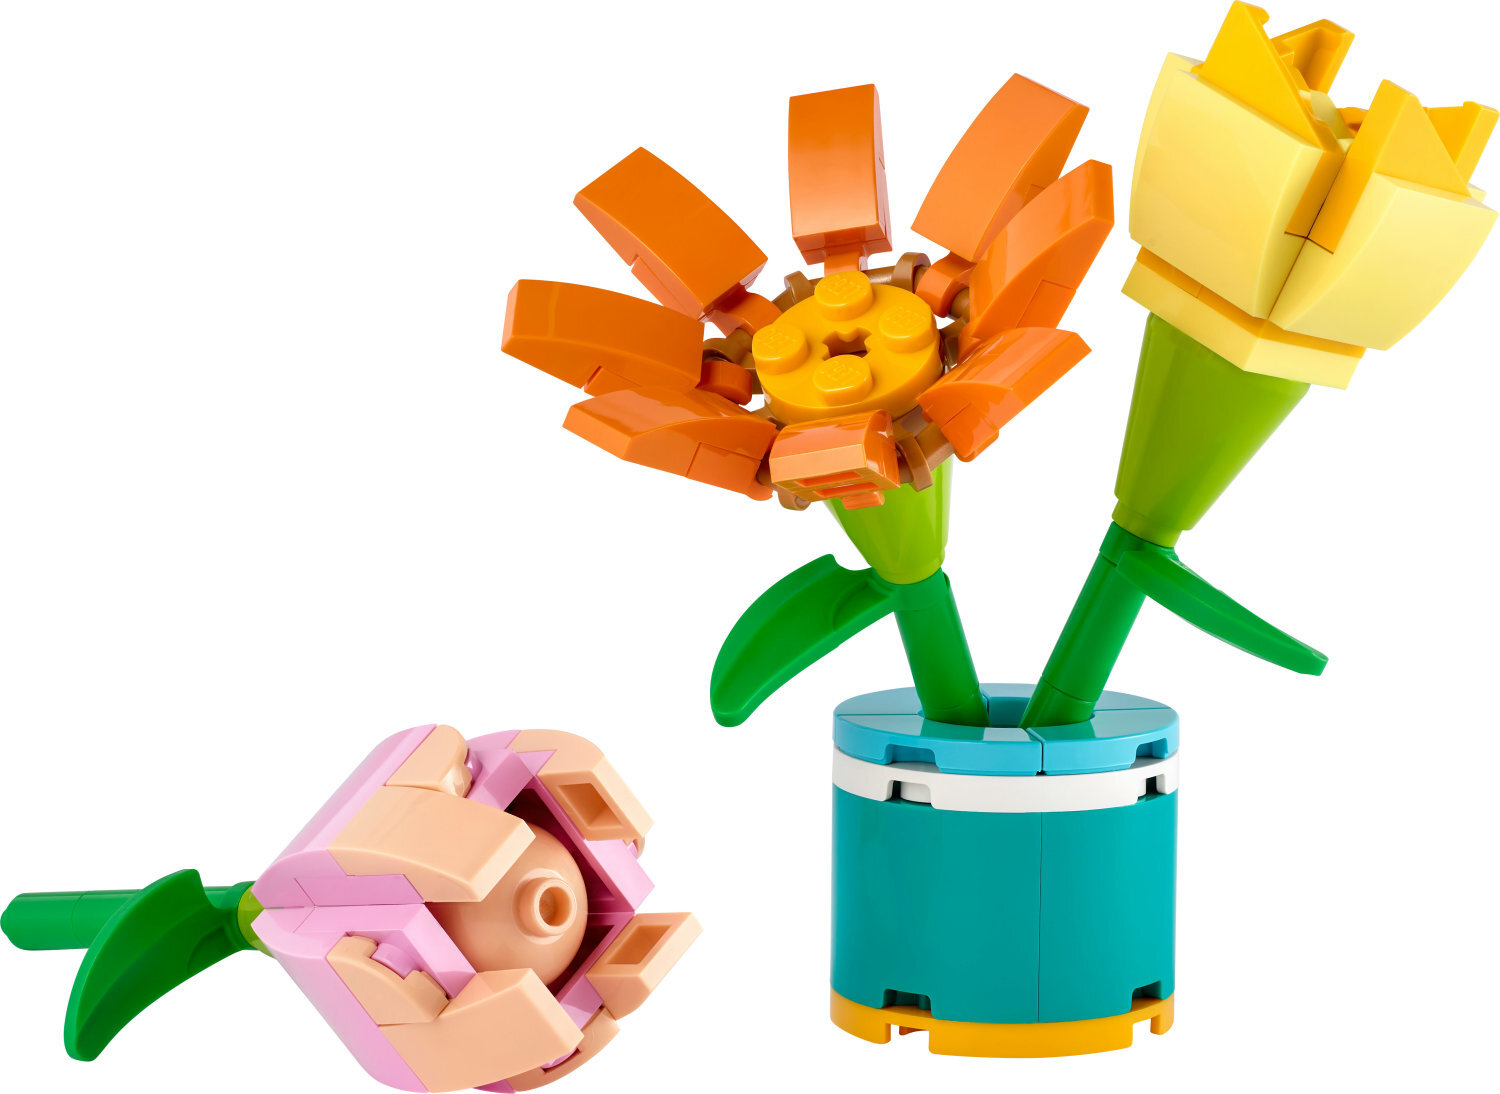 LEGO® Friends: Friendship Flowers - The Toy Box Hanover